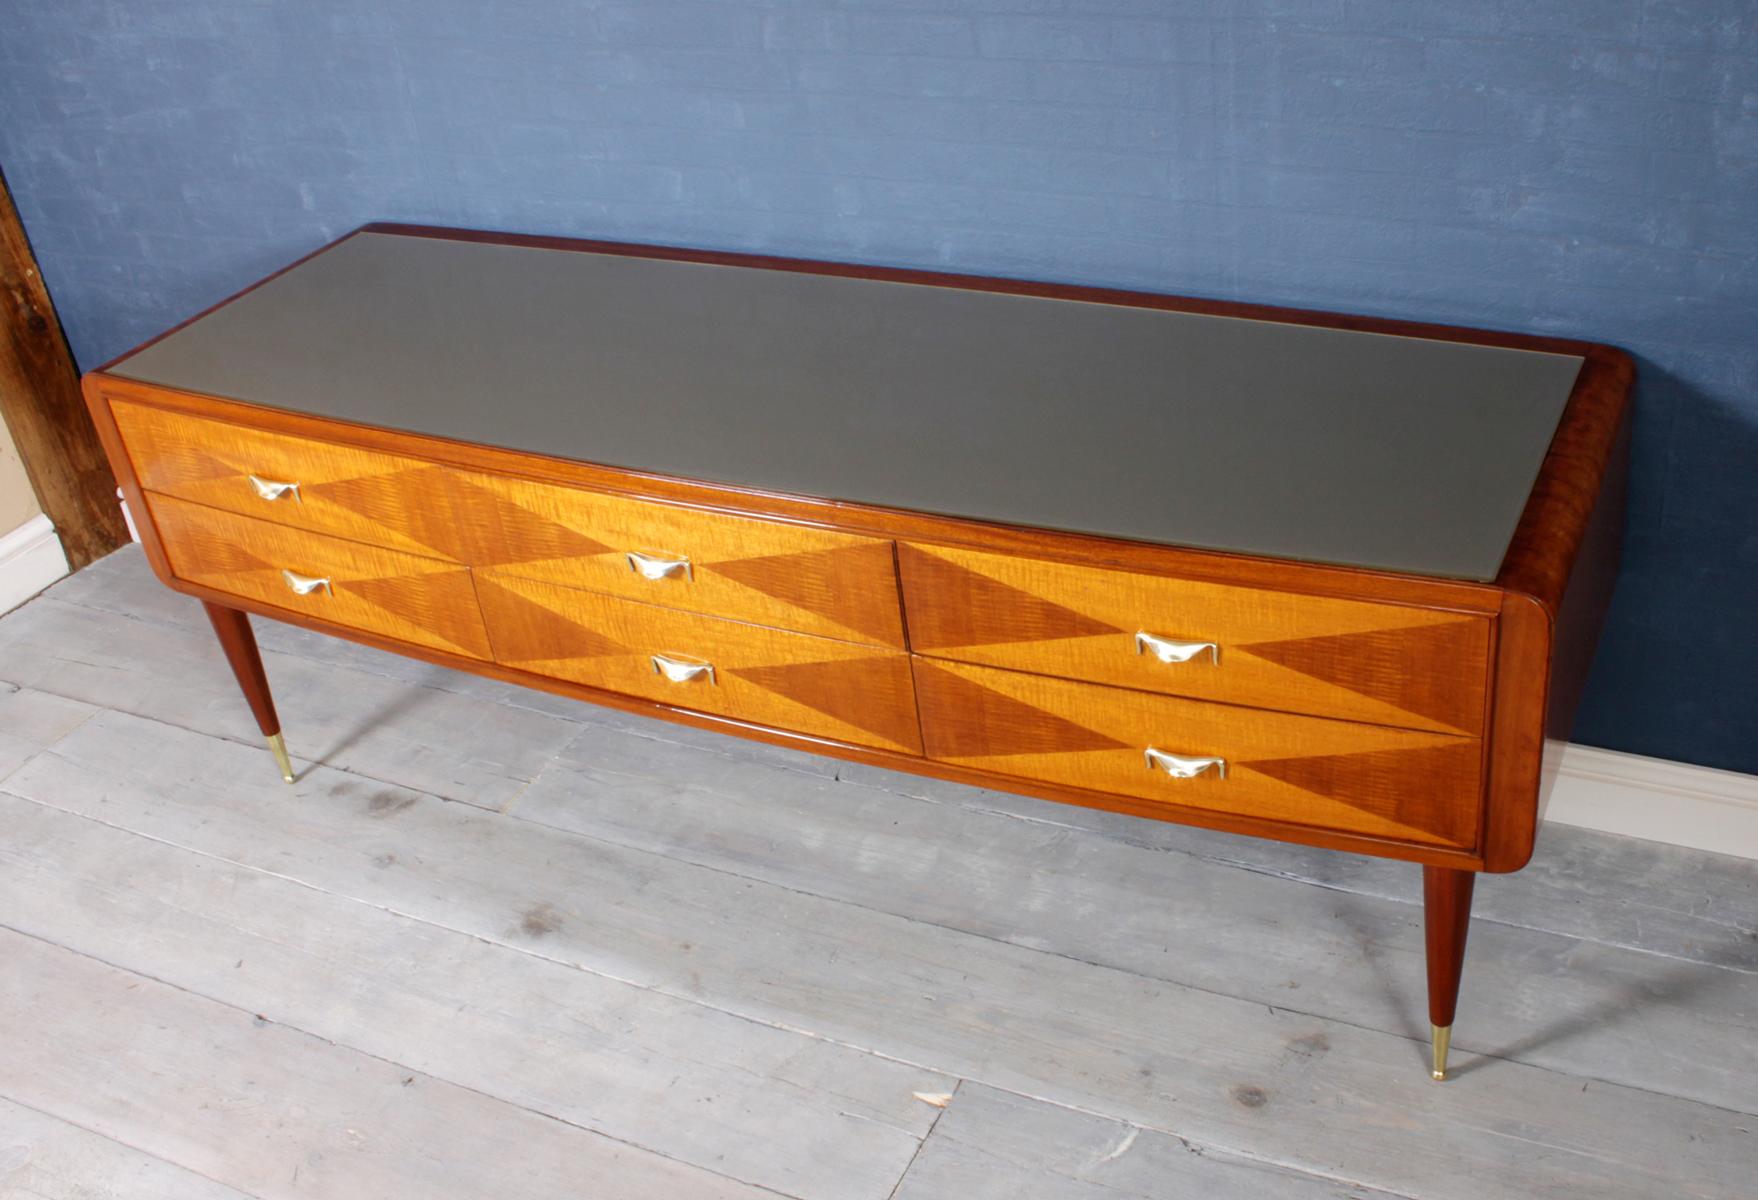 Italian midcentury long chest of drawers

A midcentury long low chest with six drawers in satin wood with brass handles ad feet tips and off white glass top, the chest is in excellent condition throughout and has been fully hand polished

Age: